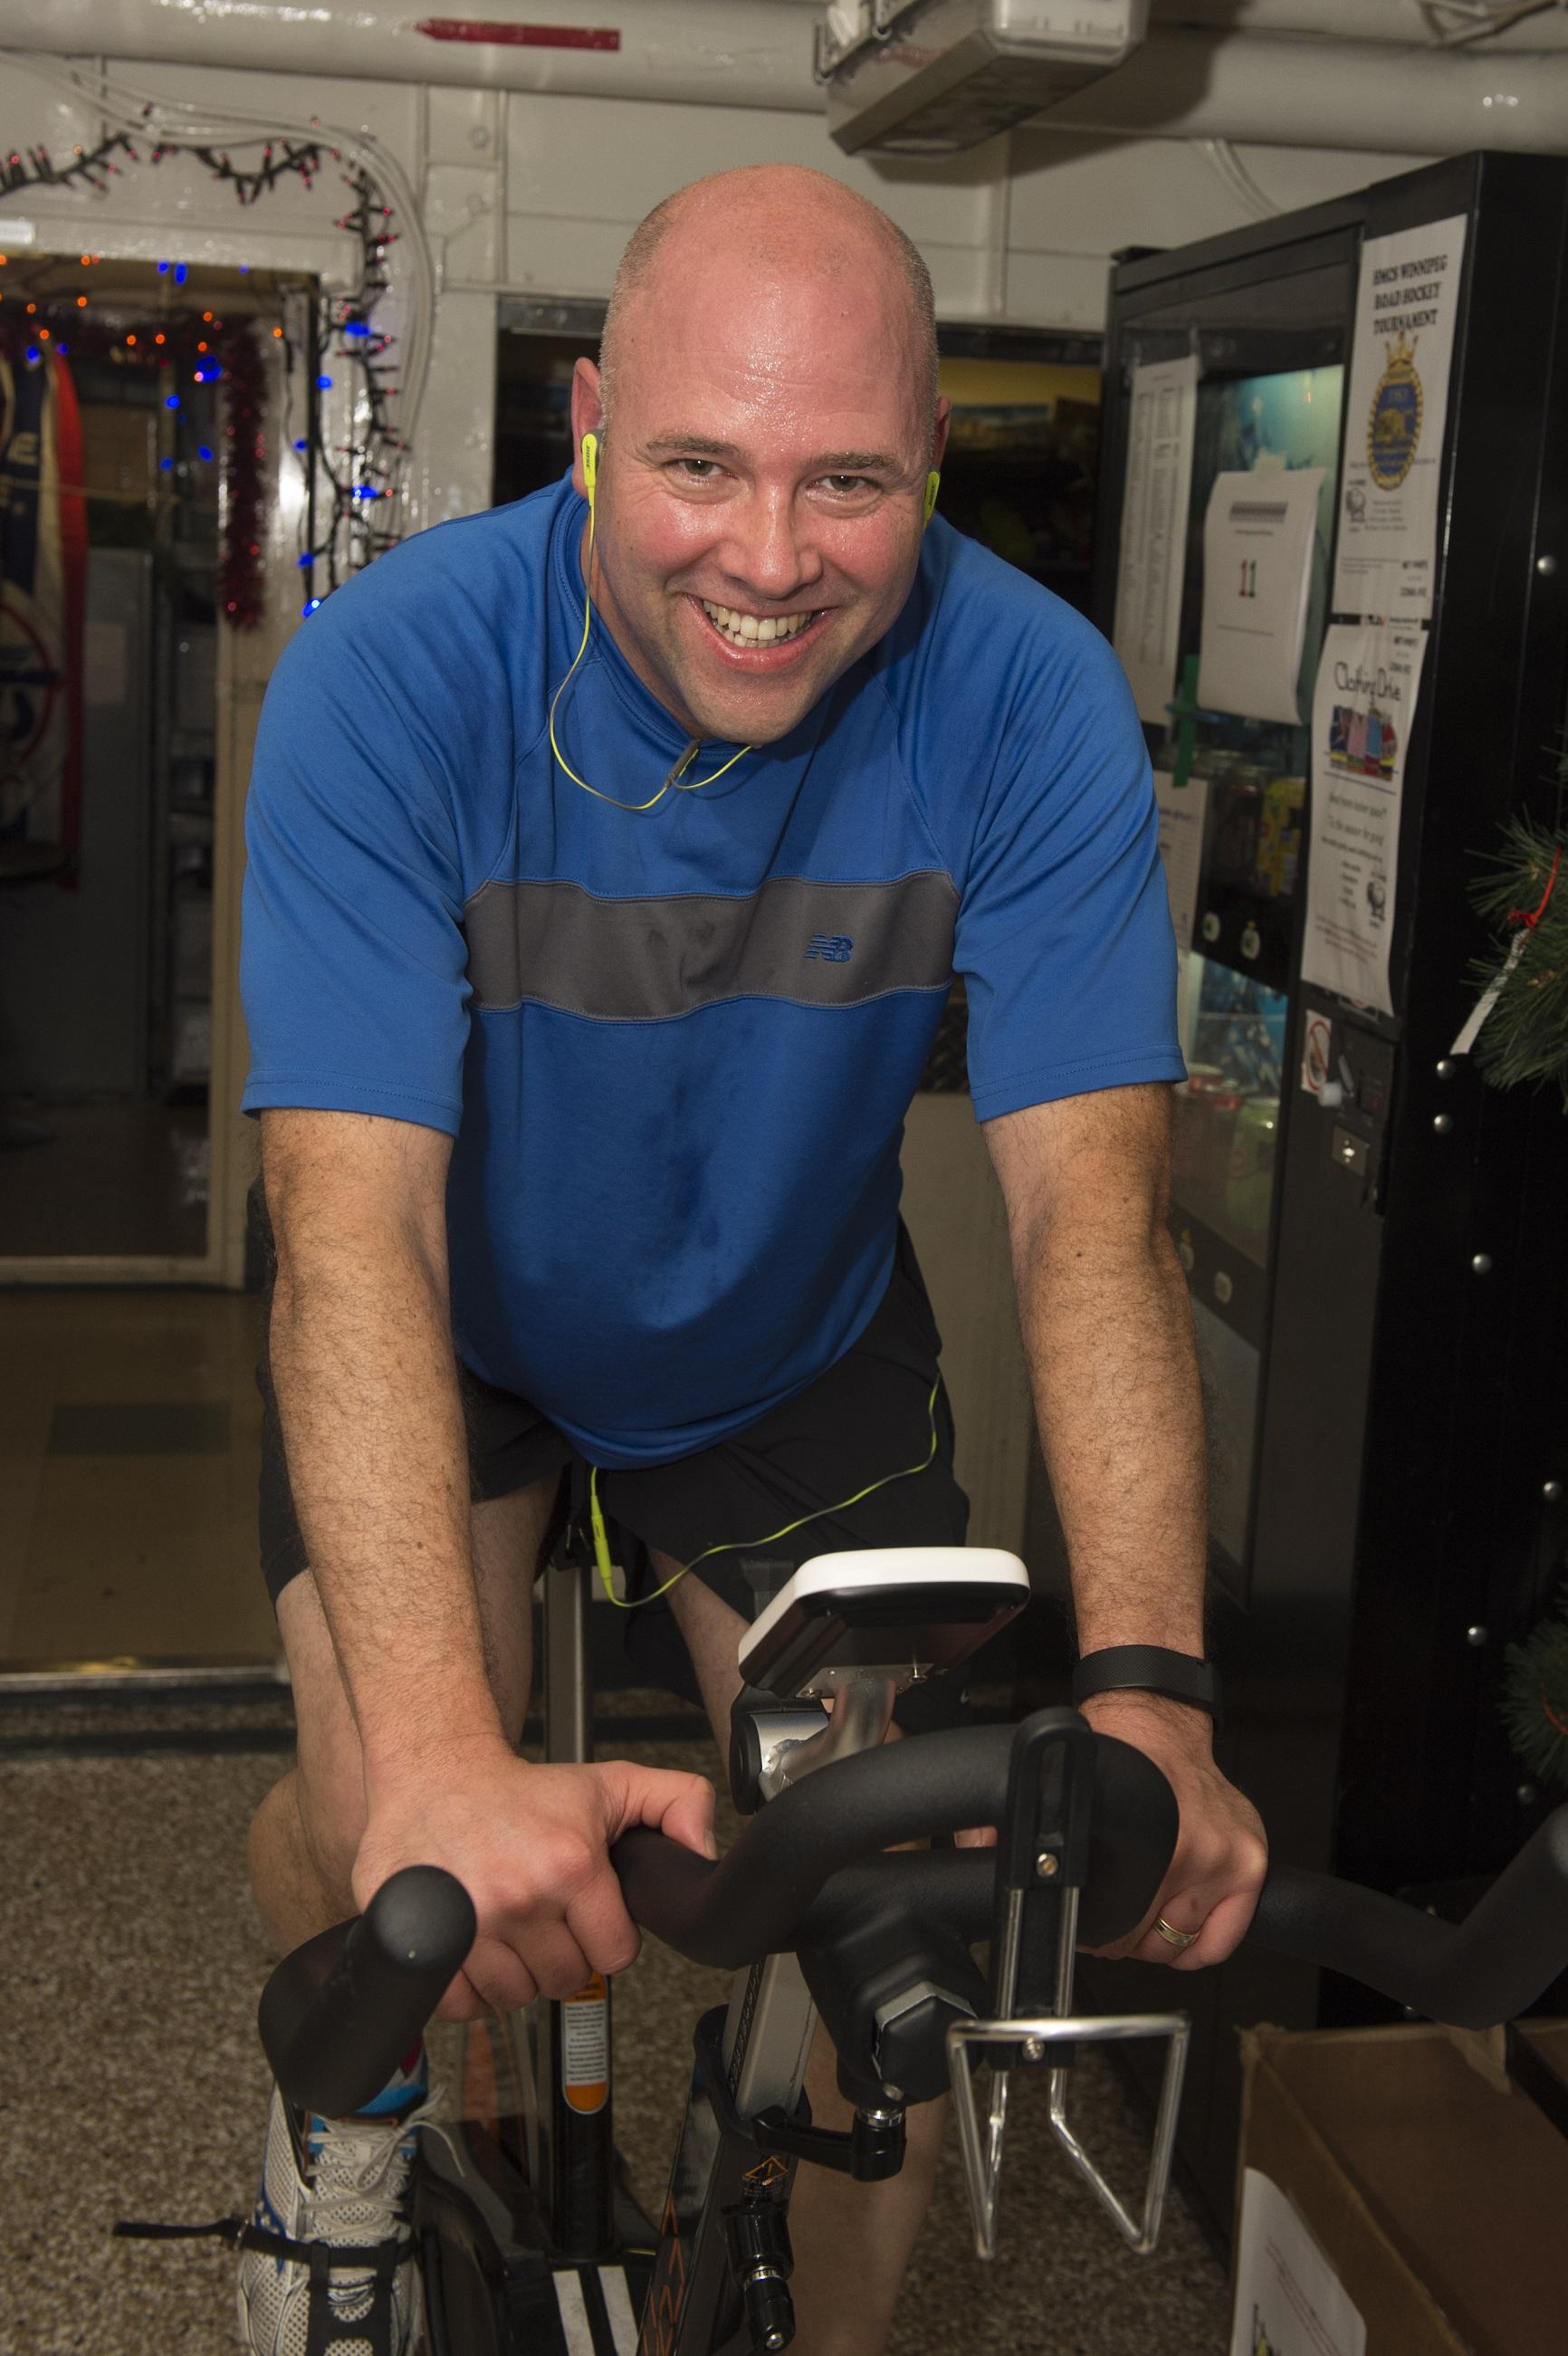 Commander Pascal Belhumeur, the Commanding Officer of HMCS Winnipeg participates in the ship’s Spin-a-Thon fitness challenge during Operation REASSURANCE in the Mediterranean Sea on December 14, 2015.